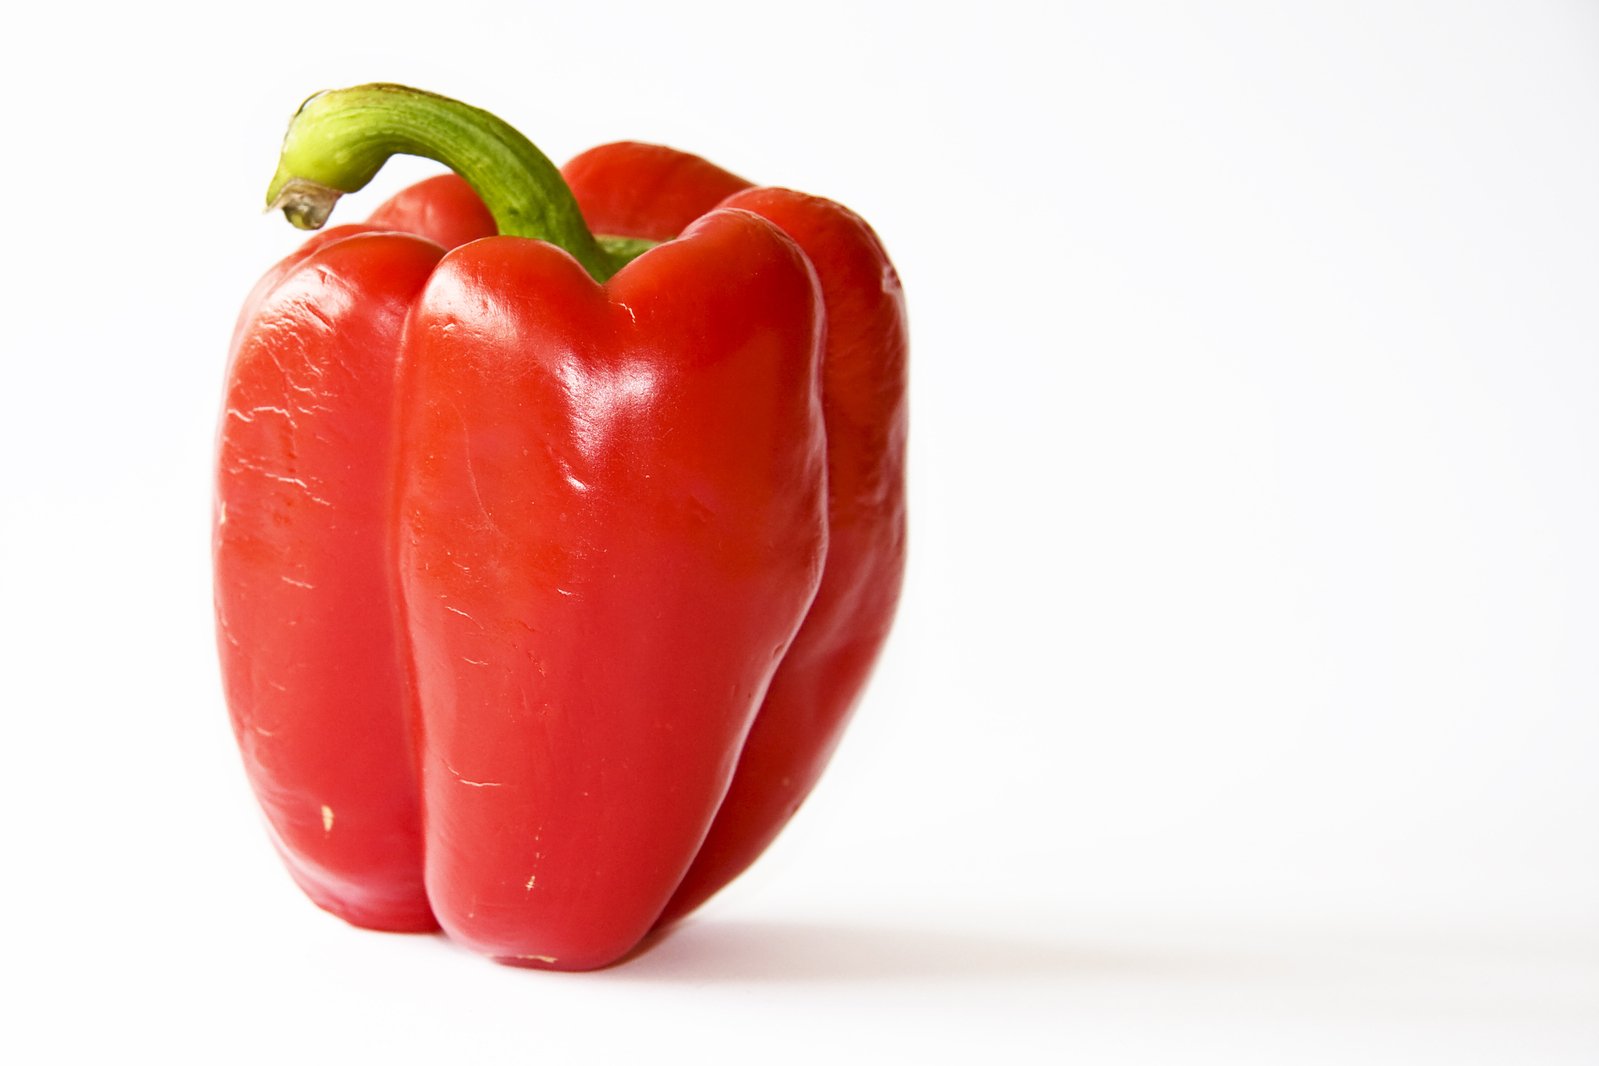 two red bell peppers are in focus against a white background